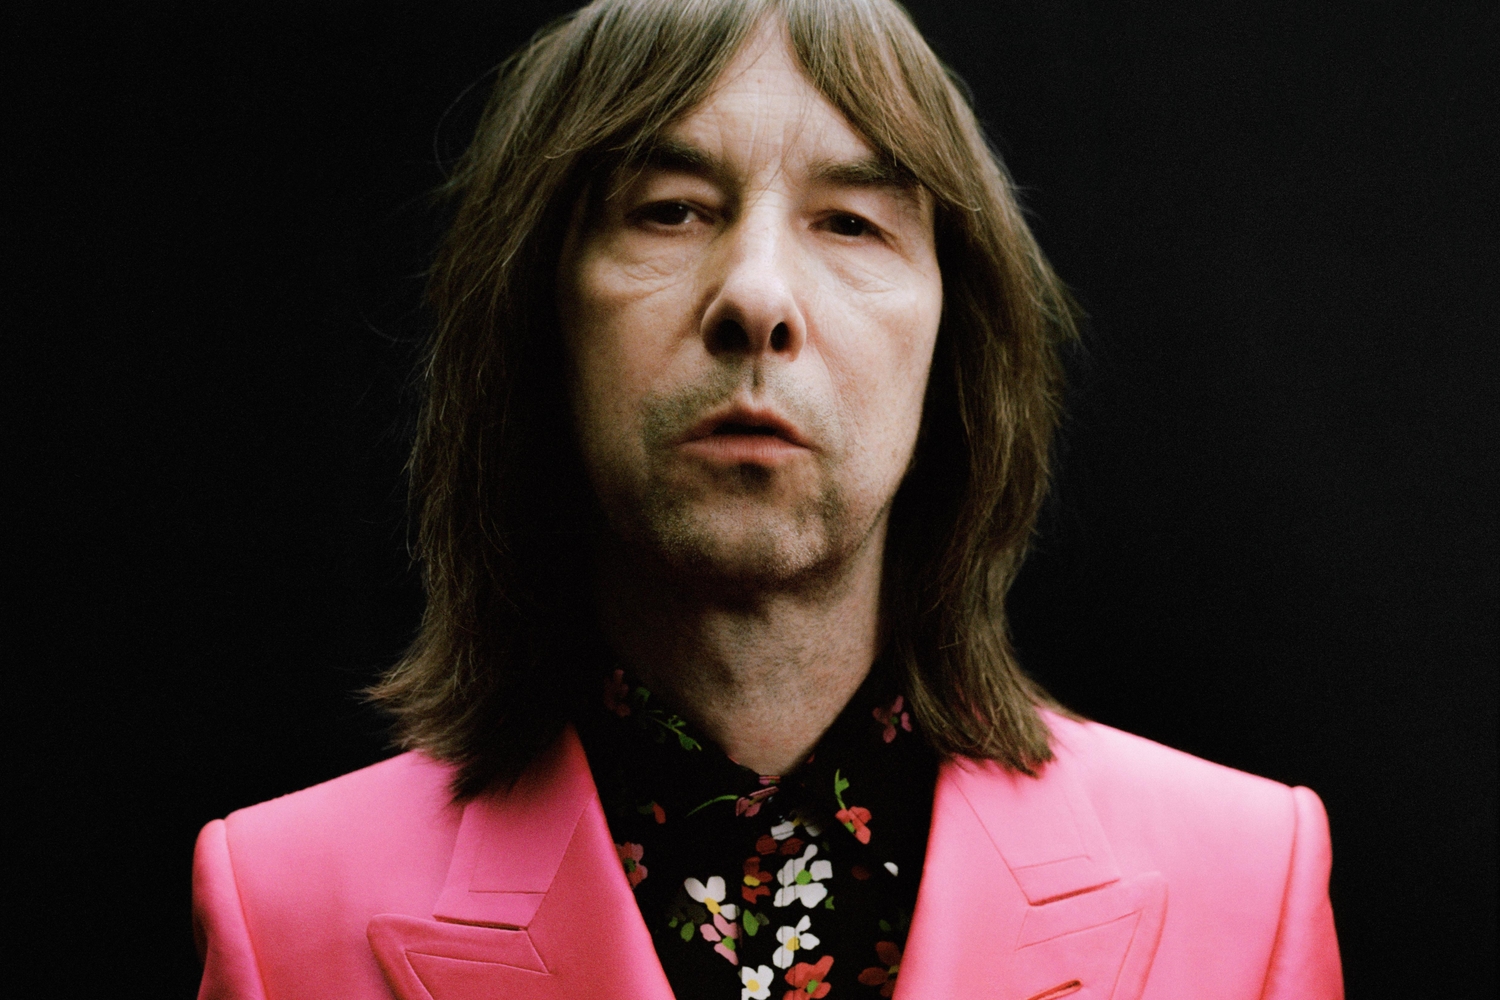 Primal Scream return with details of new album &#8216;Come Ahead&#8217; and share latest single &#8216;Love Insurrection&#8217;